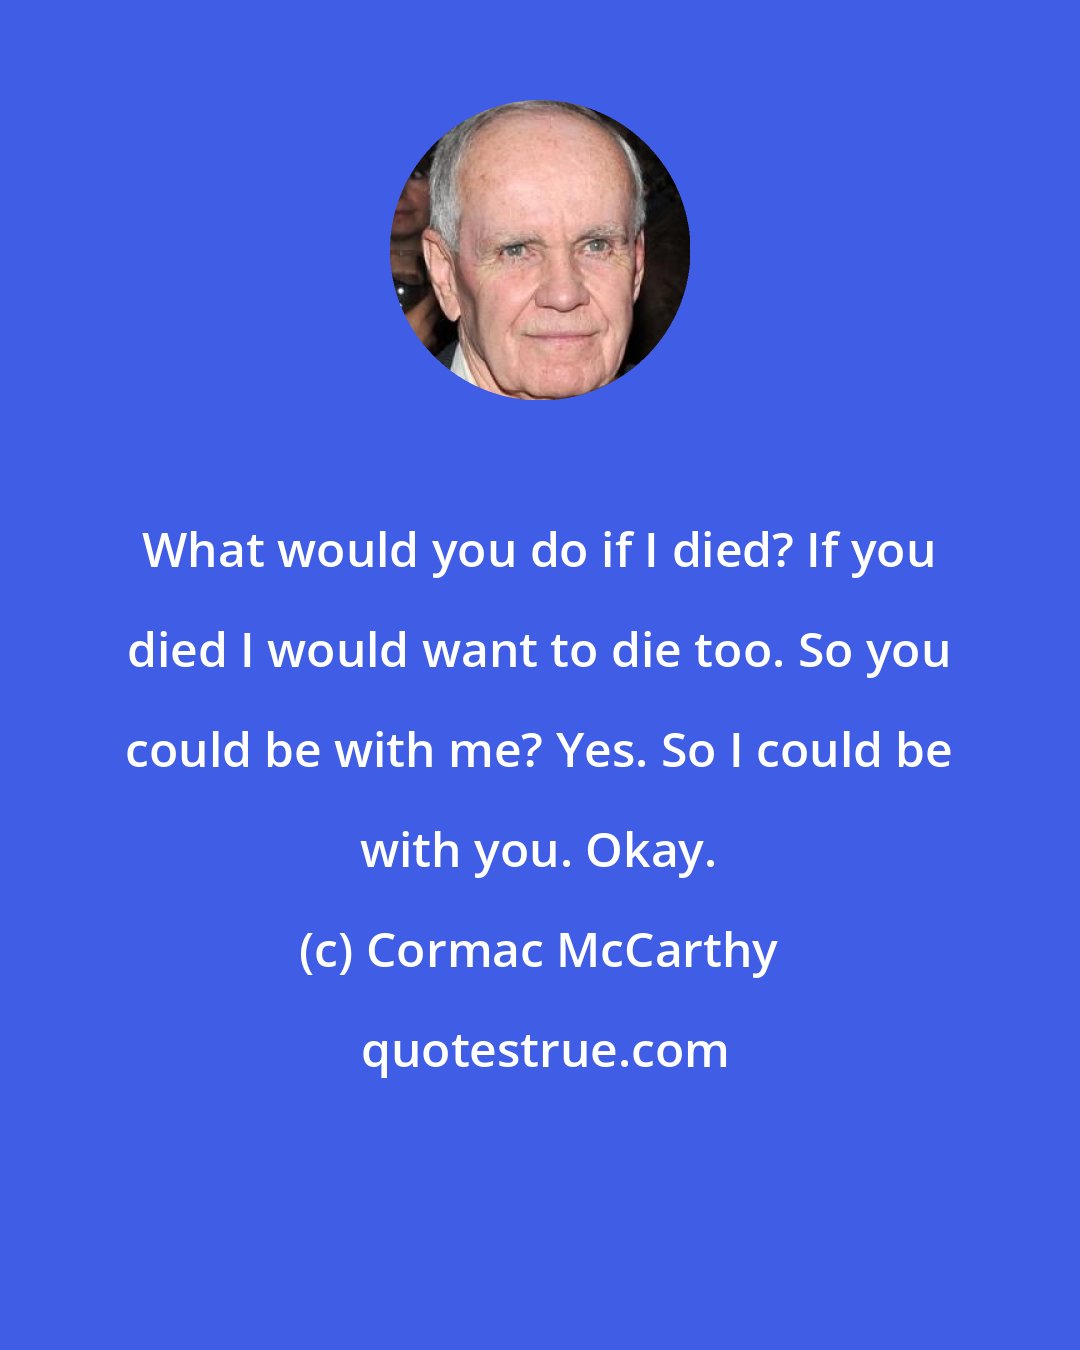 Cormac McCarthy: What would you do if I died? If you died I would want to die too. So you could be with me? Yes. So I could be with you. Okay.